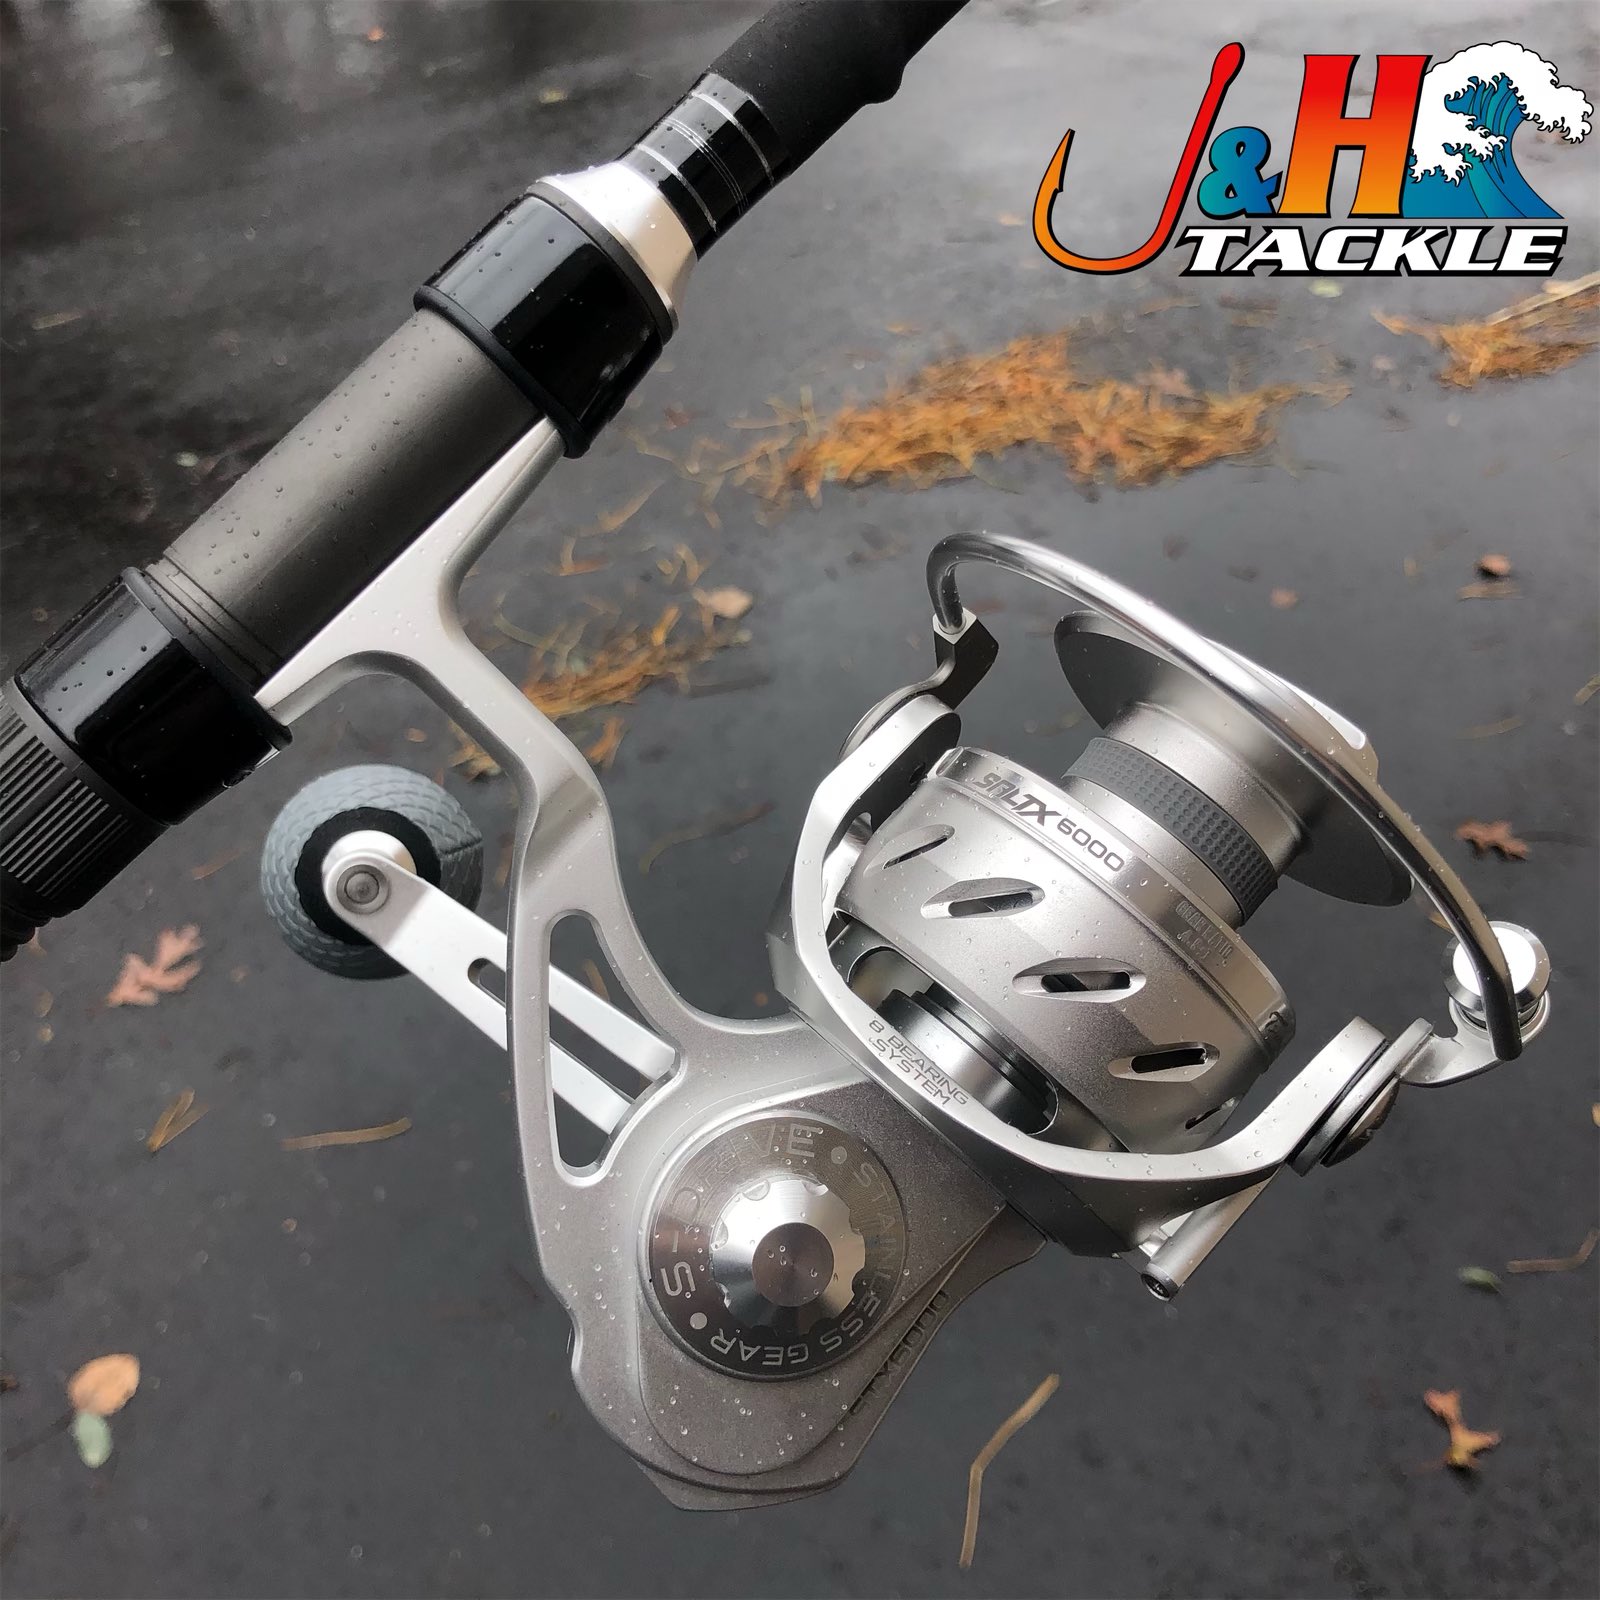 J&H Tackle on X: Tsunami SaltX 6000 Spinning Reels are back in